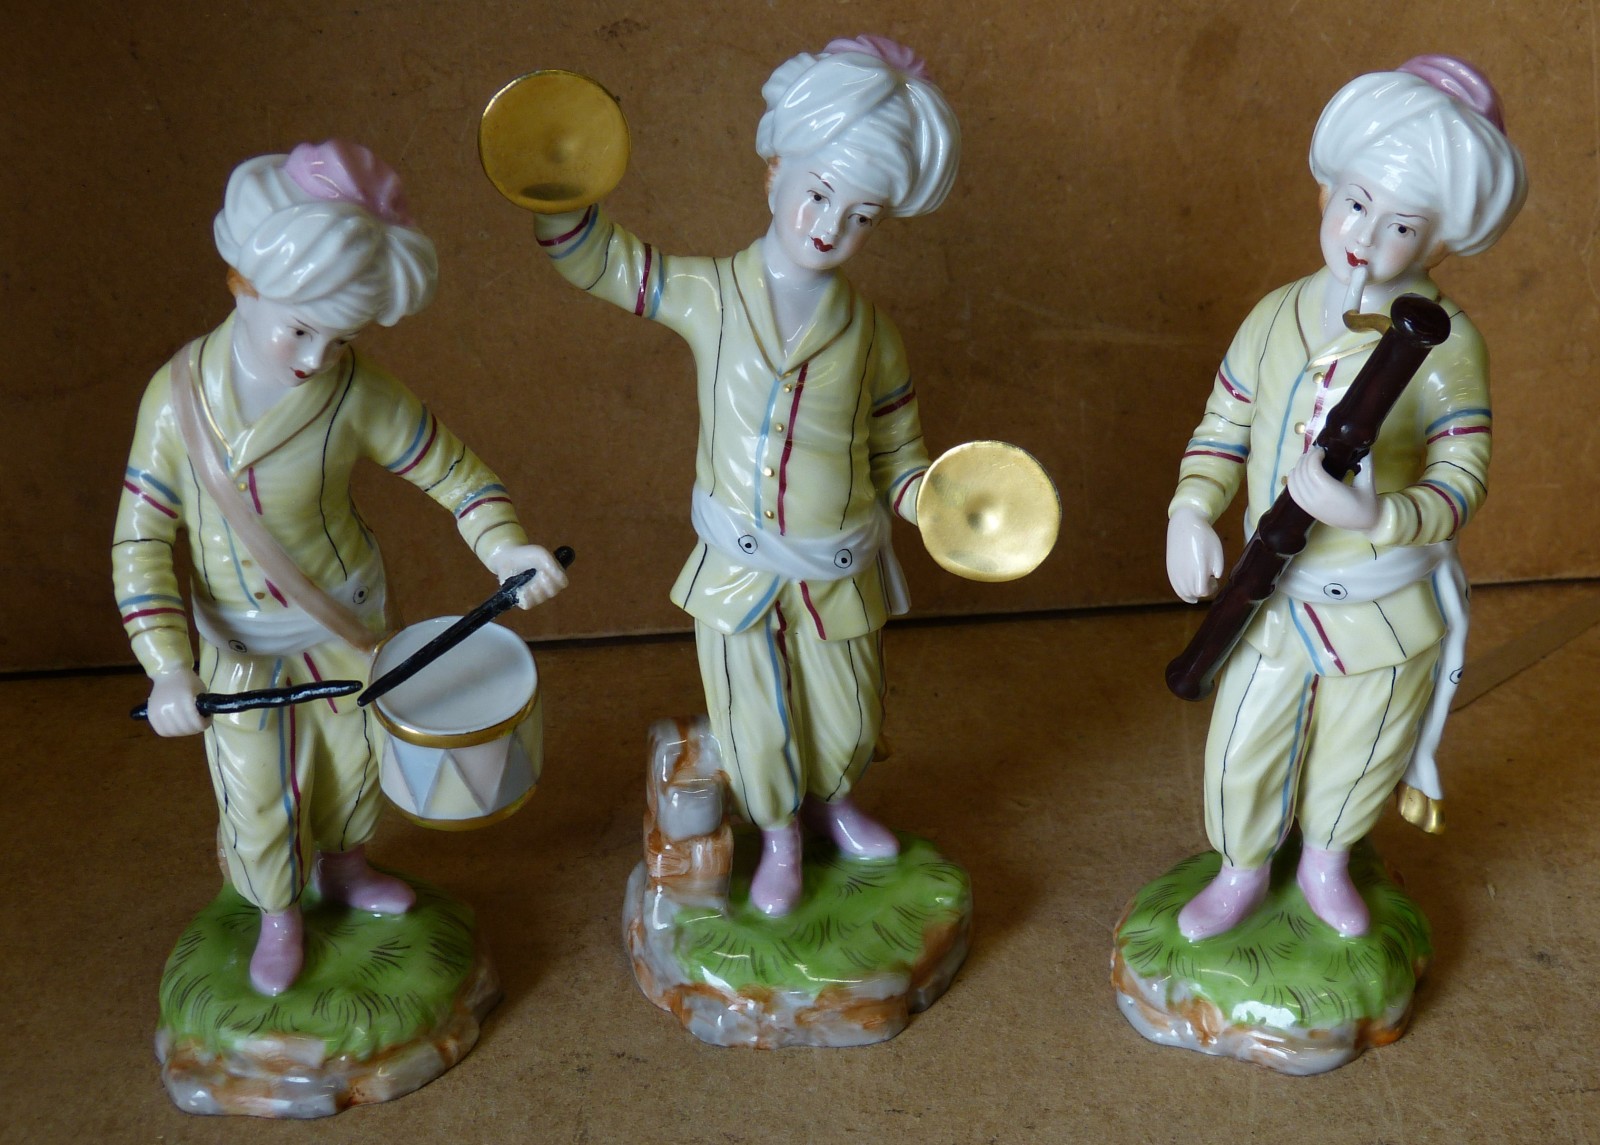 A Set of 3 Hexter China Musicians of young boys playing musical instruments on round scalloped